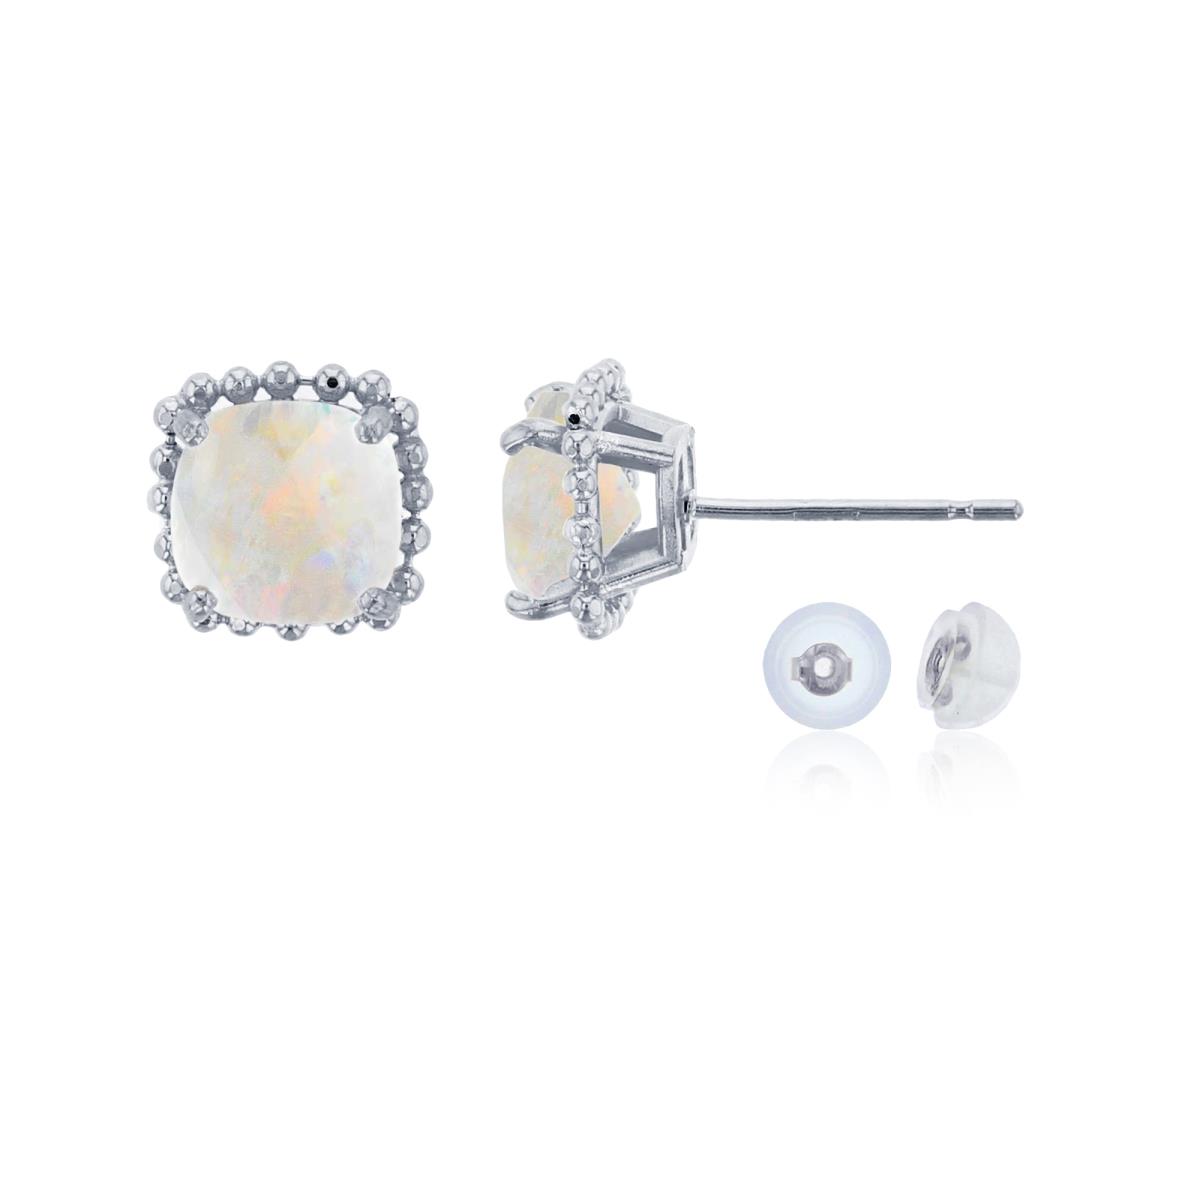 10K White Gold 6x6mm Cushion Cut Created Opal Bead Frame Stud Earring with Silicone Back